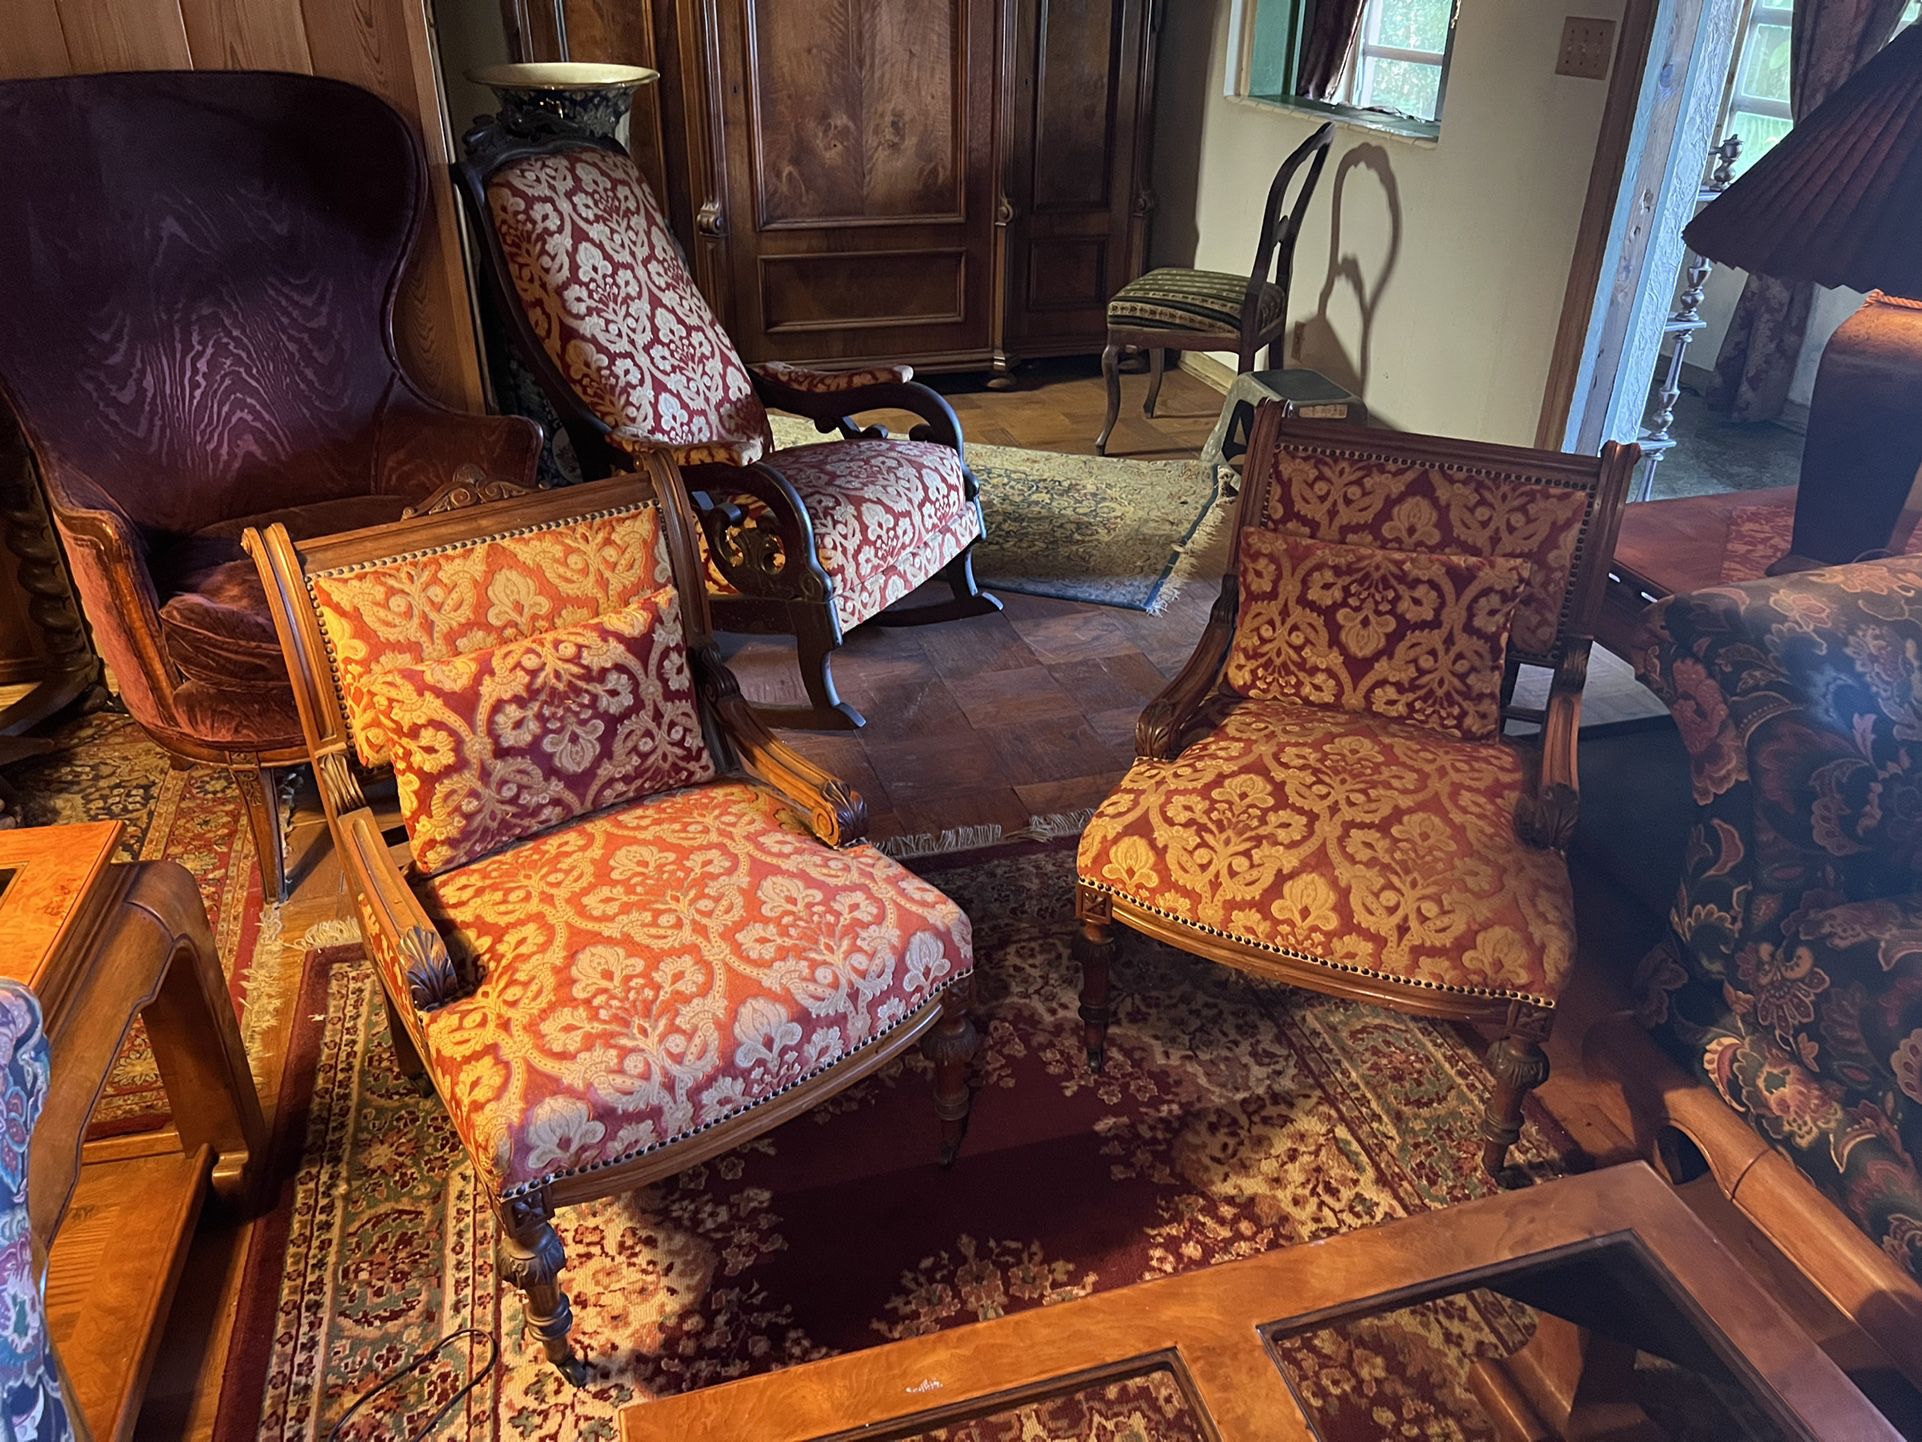 Antique Chairs 